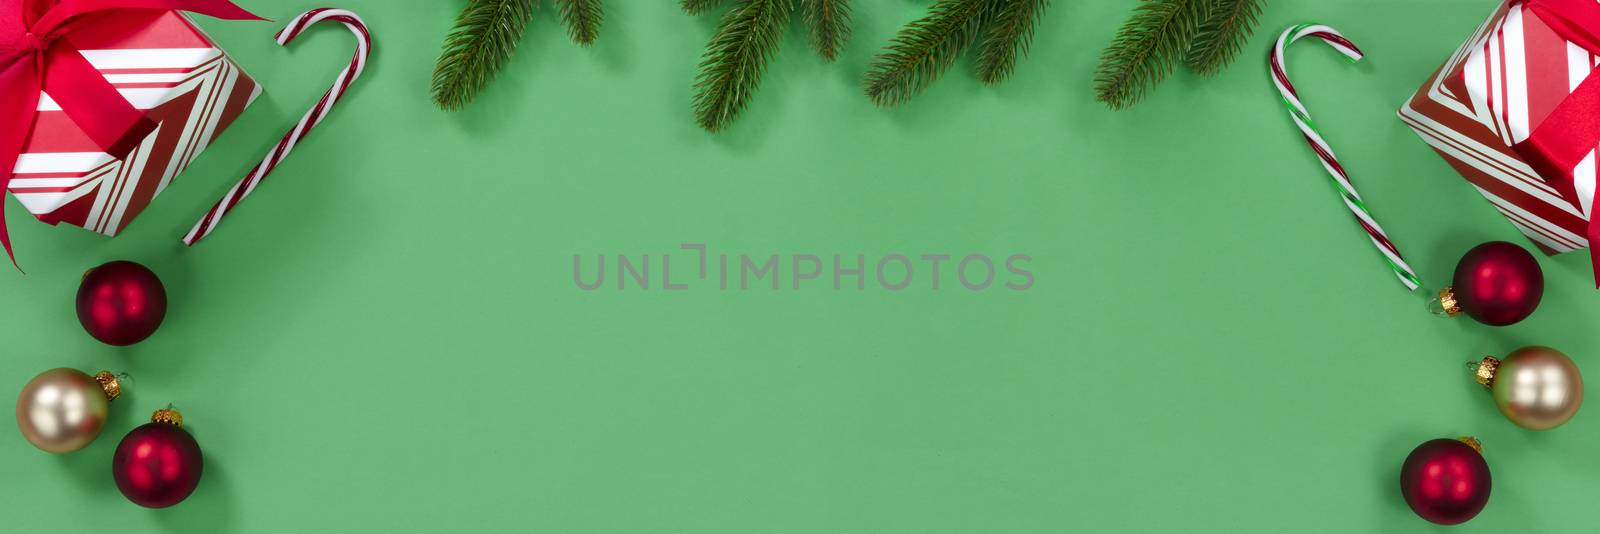 Bright green background with decorations for the Christmas seaso by tab1962